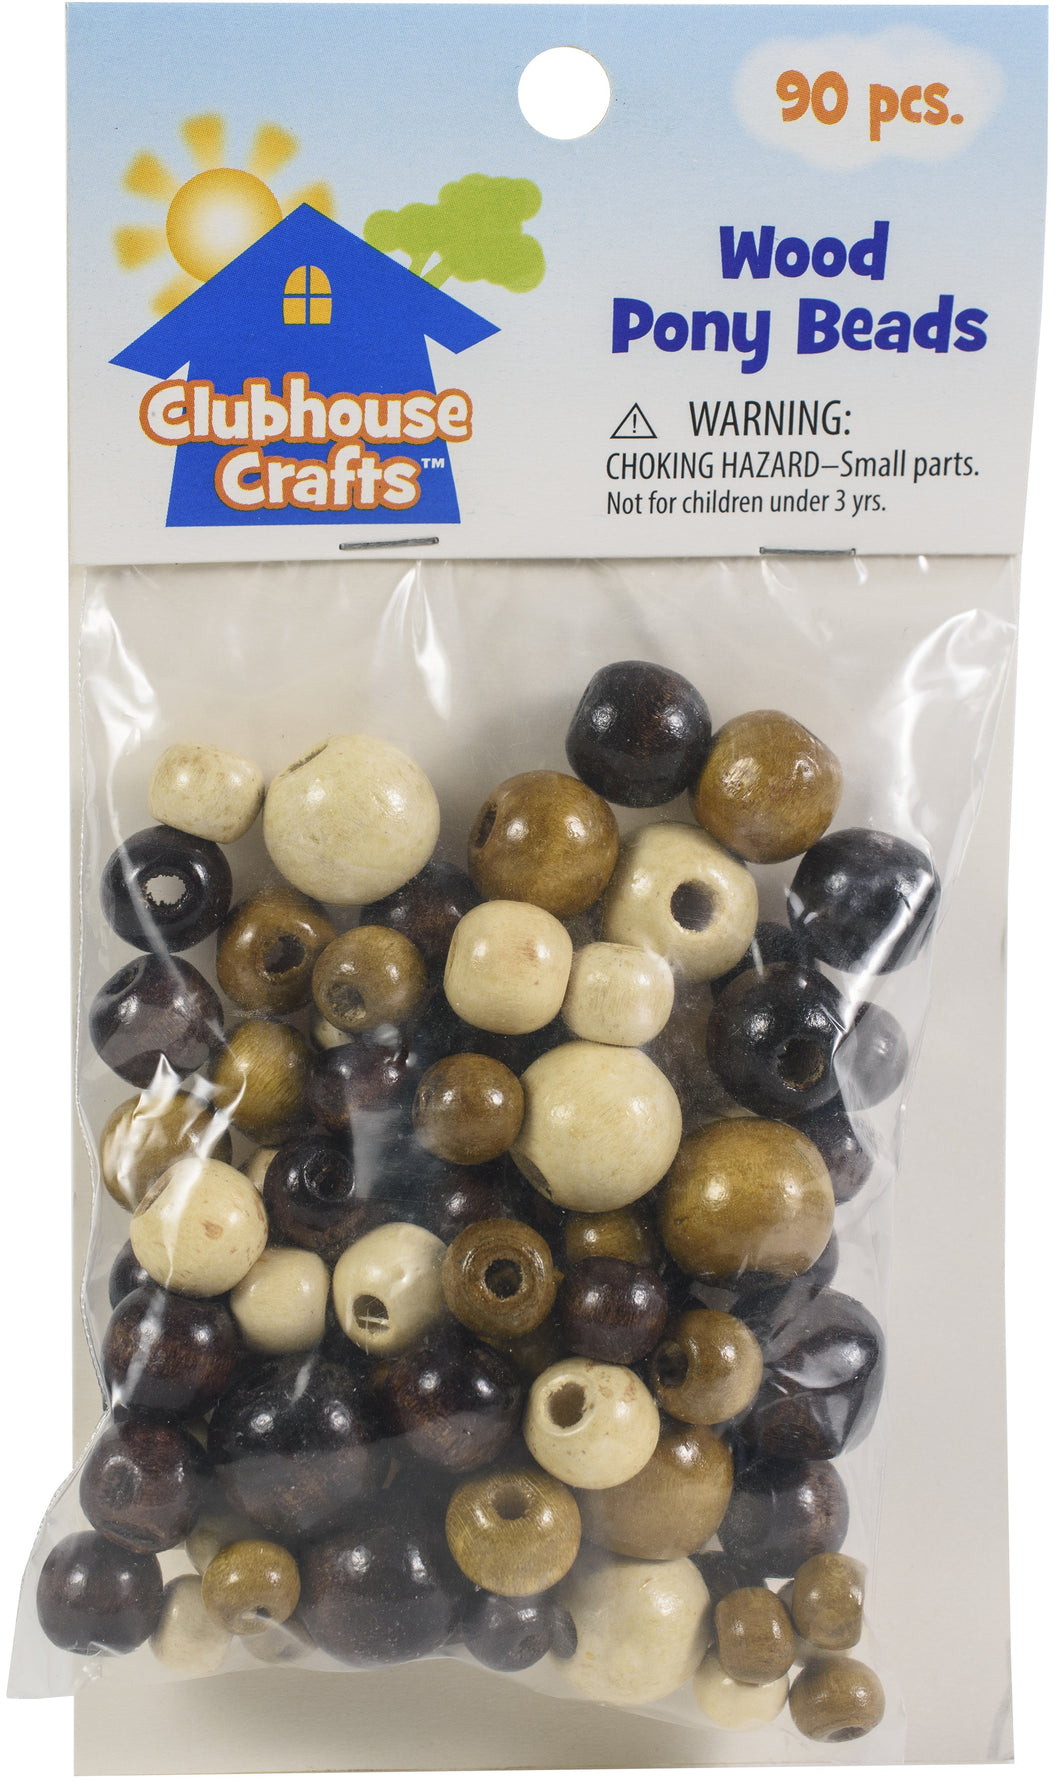 Clubhouse Crafts Wood Pony Beads 90pk